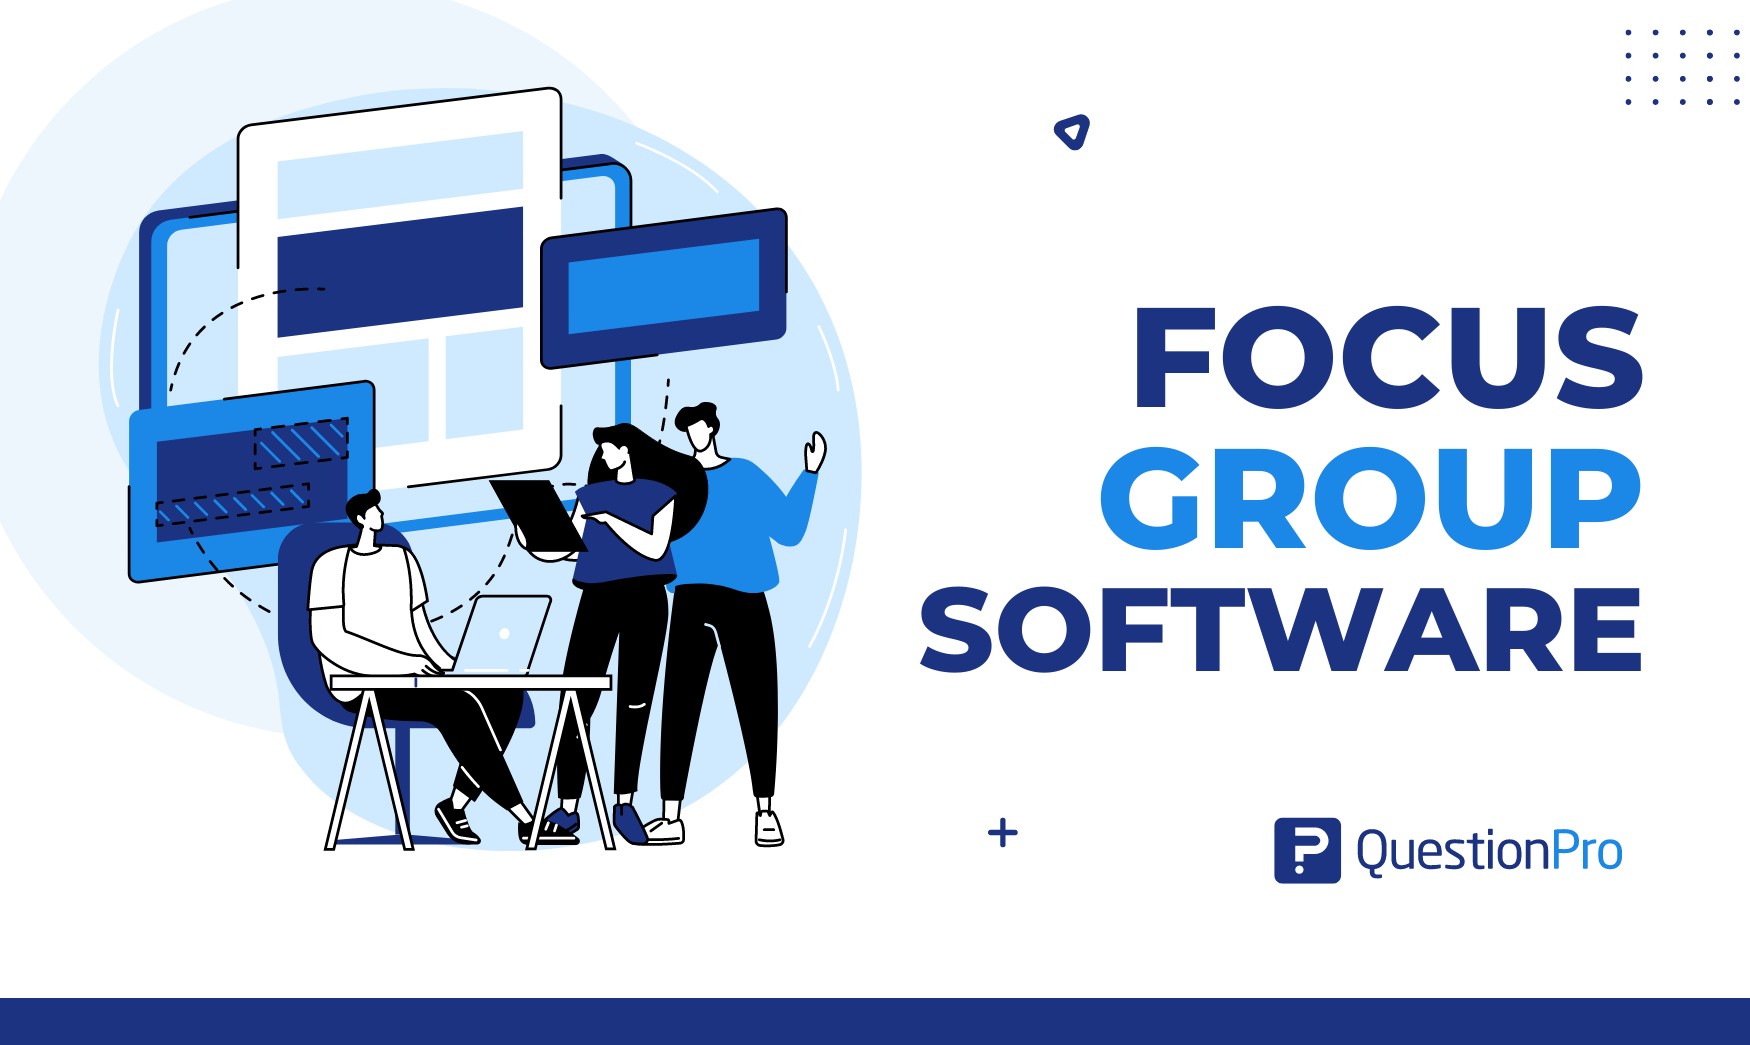 Focus group software